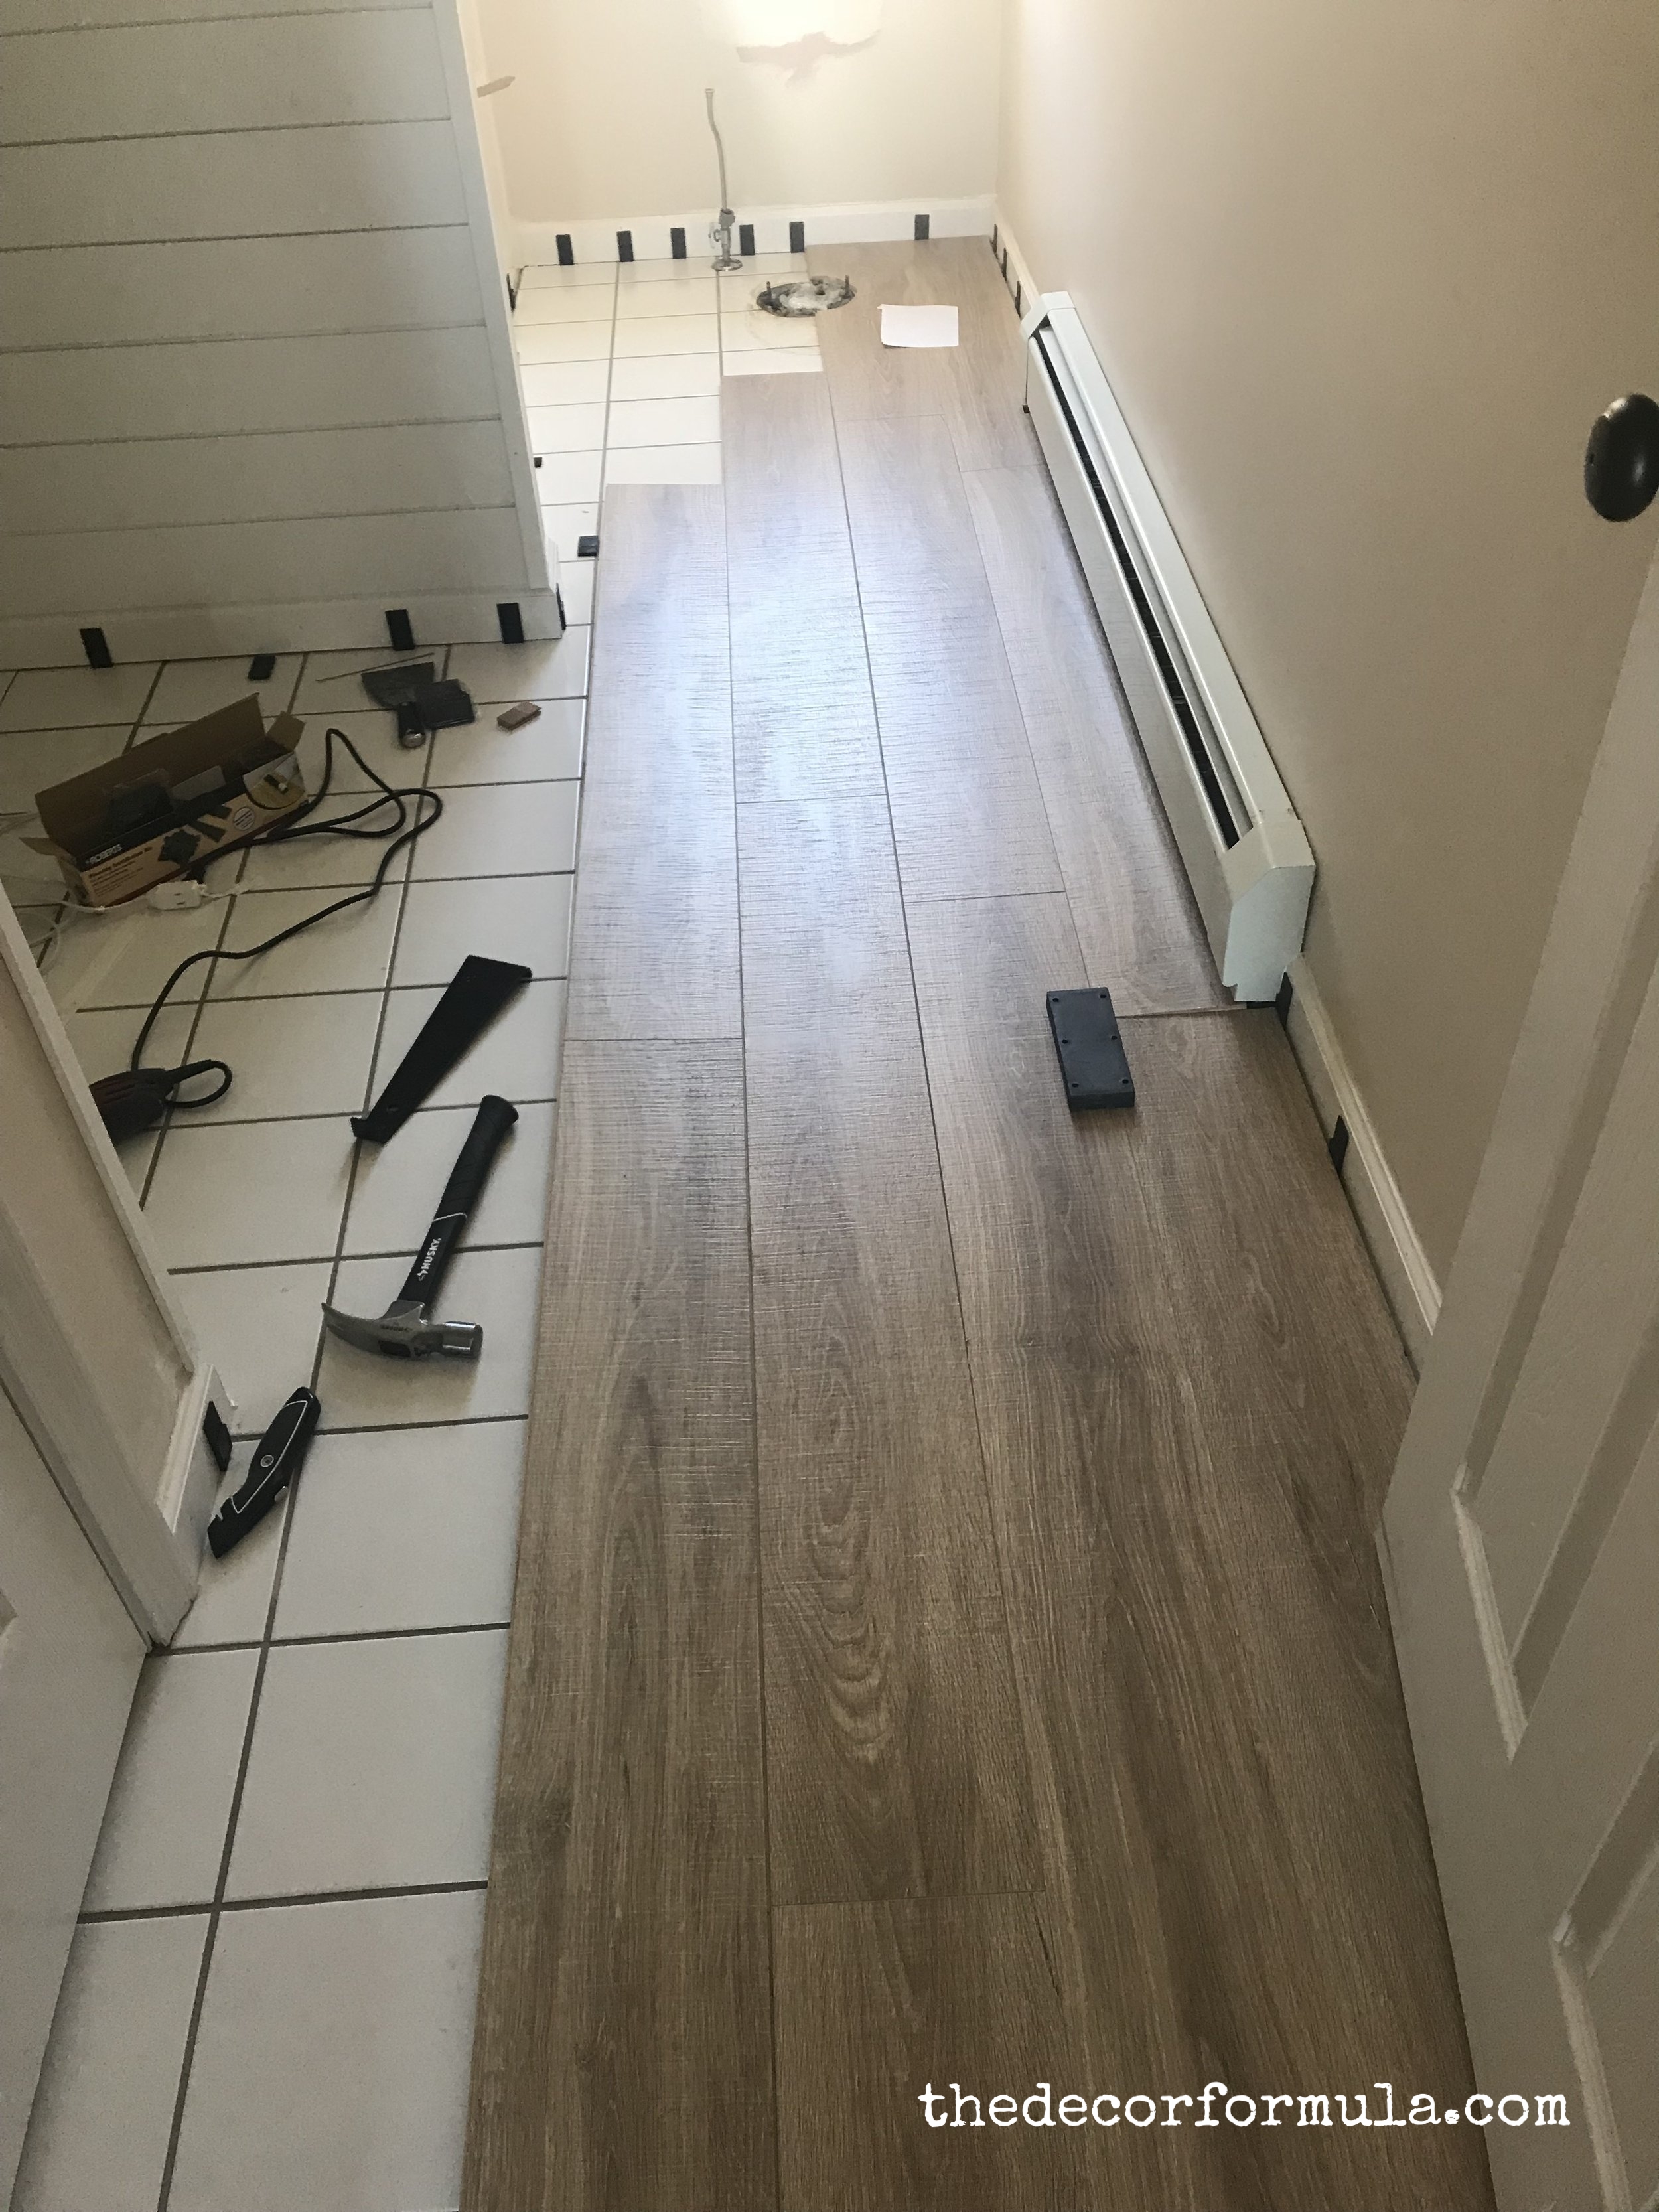 Ideas For Covering Up Tile Floors, Can You Lay Laminate Wood Flooring Over Ceramic Tile